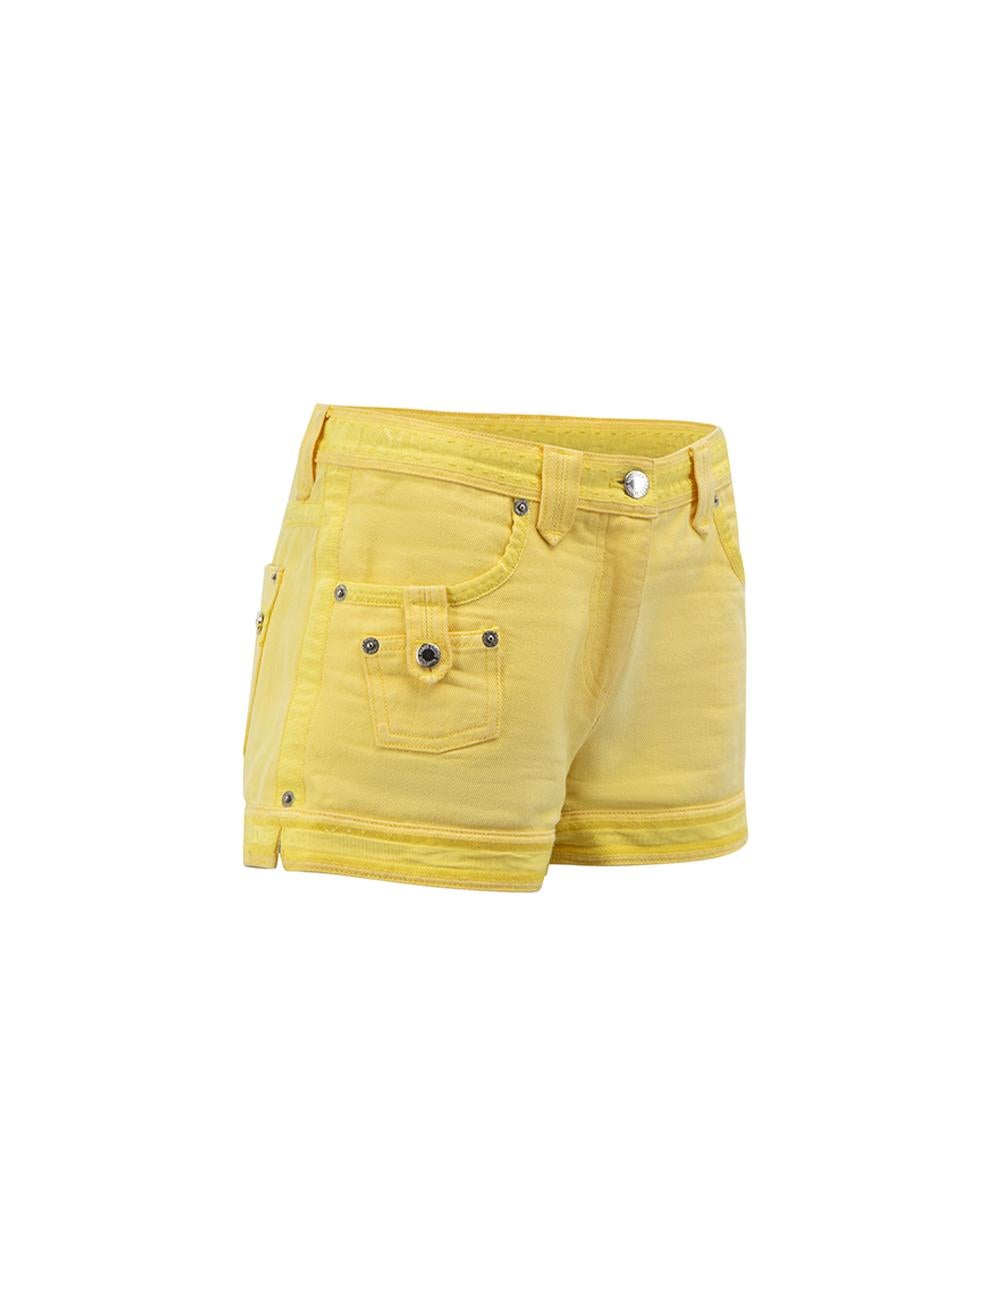 CONDITION is Very good. Minimal wear to shorts is evident. Minimal wear to the outer denim fabric which is slighty discoloured on this used Louis Vuitton designer resale item.   Details  Yellow Denim Shorts Low rise Front zip closure with button